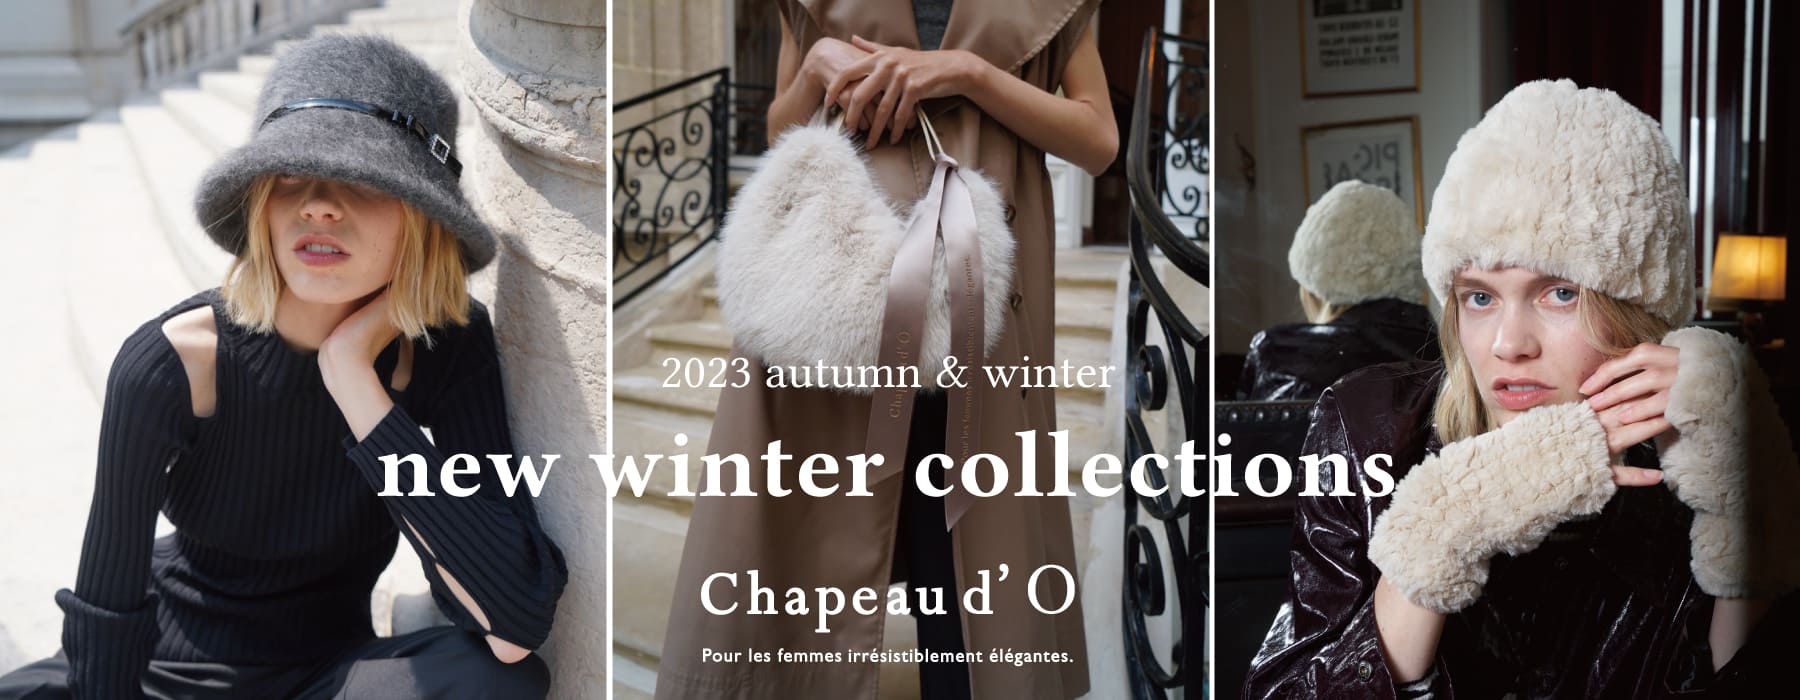 Chapeau d’ O new winter collections